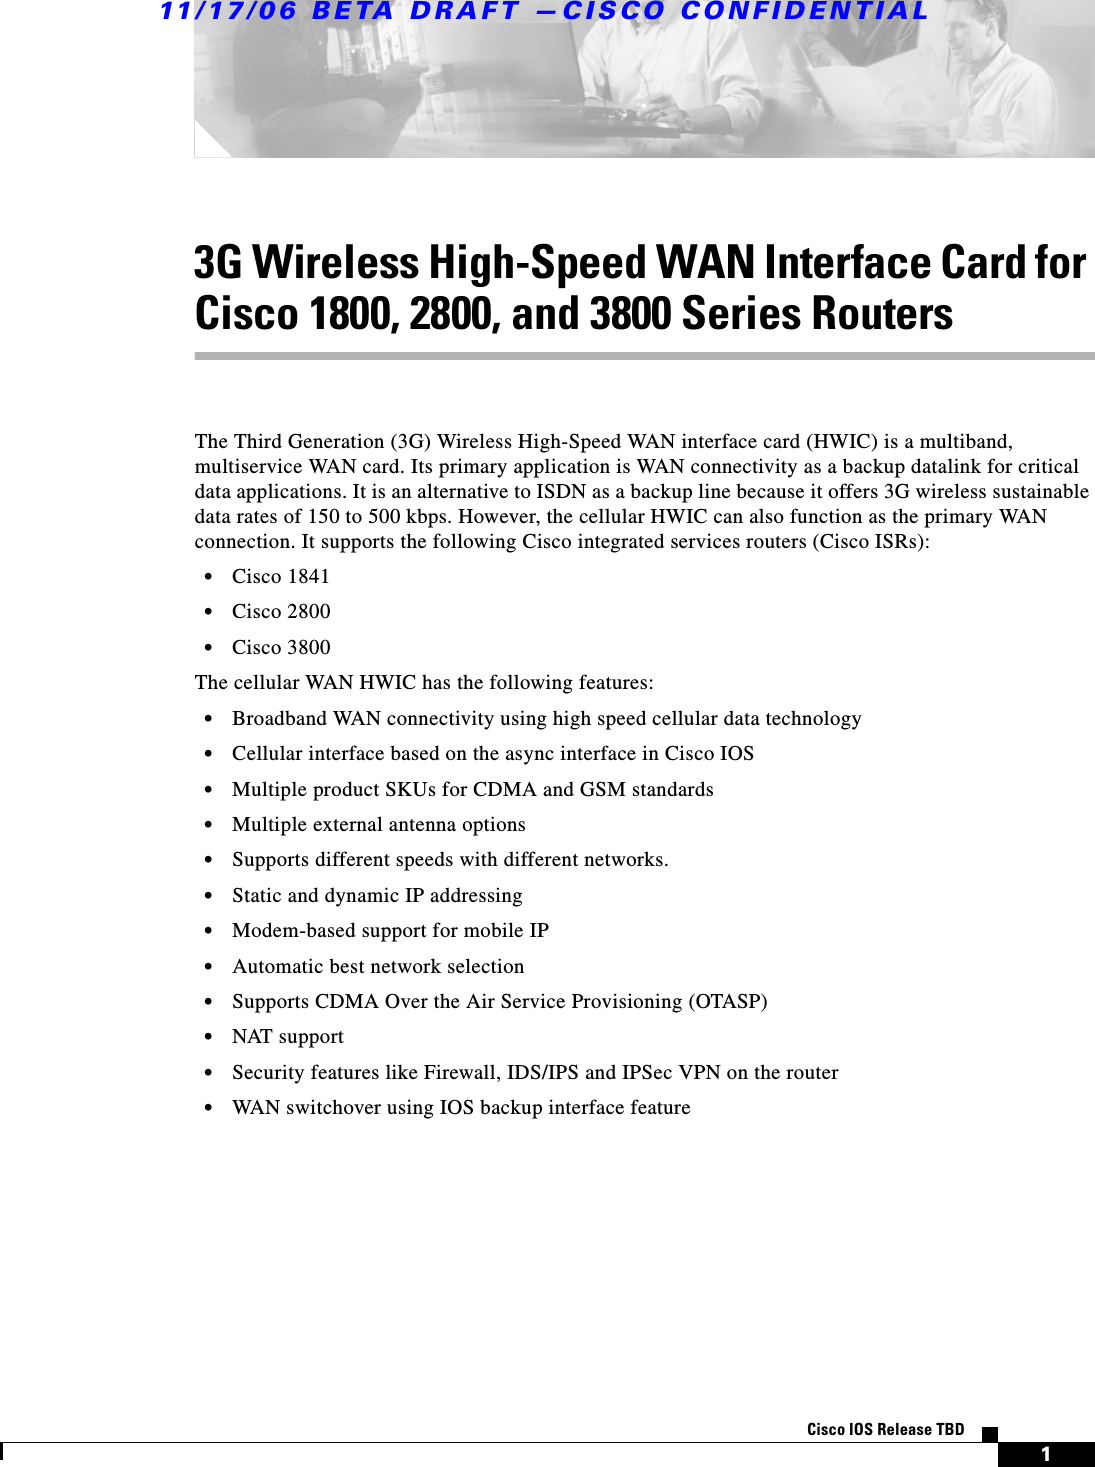 11/17/06 BETA DRAFT —CISCO CONFIDENTIAL 1Cisco IOS Release TBD3G Wireless High-Speed WAN Interface Card for Cisco 1800, 2800, and 3800 Series RoutersThe Third Generation (3G) Wireless High-Speed WAN interface card (HWIC) is a multiband, multiservice WAN card. Its primary application is WAN connectivity as a backup datalink for critical data applications. It is an alternative to ISDN as a backup line because it offers 3G wireless sustainable data rates of 150 to 500 kbps. However, the cellular HWIC can also function as the primary WAN connection. It supports the following Cisco integrated services routers (Cisco ISRs):•Cisco 1841•Cisco 2800•Cisco 3800 The cellular WAN HWIC has the following features:•Broadband WAN connectivity using high speed cellular data technology•Cellular interface based on the async interface in Cisco IOS•Multiple product SKUs for CDMA and GSM standards•Multiple external antenna options•Supports different speeds with different networks.•Static and dynamic IP addressing•Modem-based support for mobile IP•Automatic best network selection•Supports CDMA Over the Air Service Provisioning (OTASP)•NAT support•Security features like Firewall, IDS/IPS and IPSec VPN on the router•WAN switchover using IOS backup interface feature